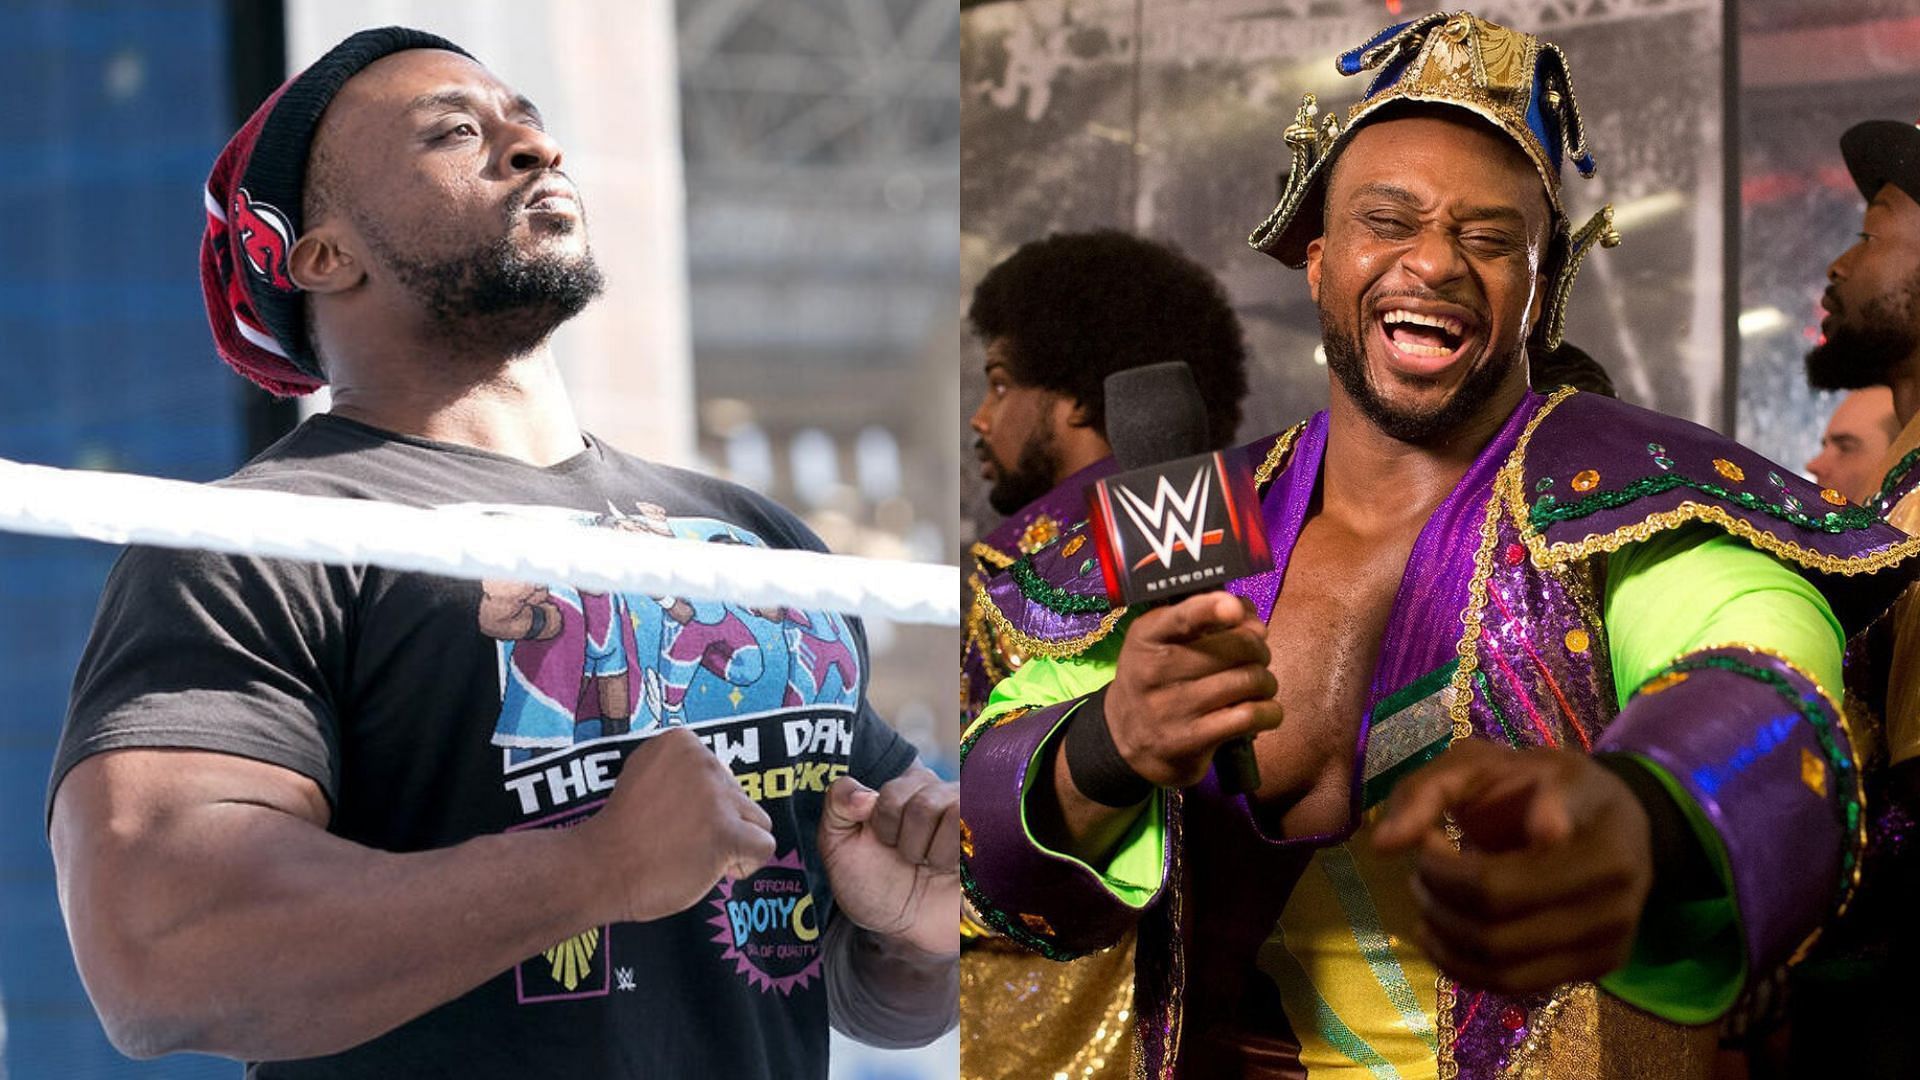 The New Day member has shared a personal update today.